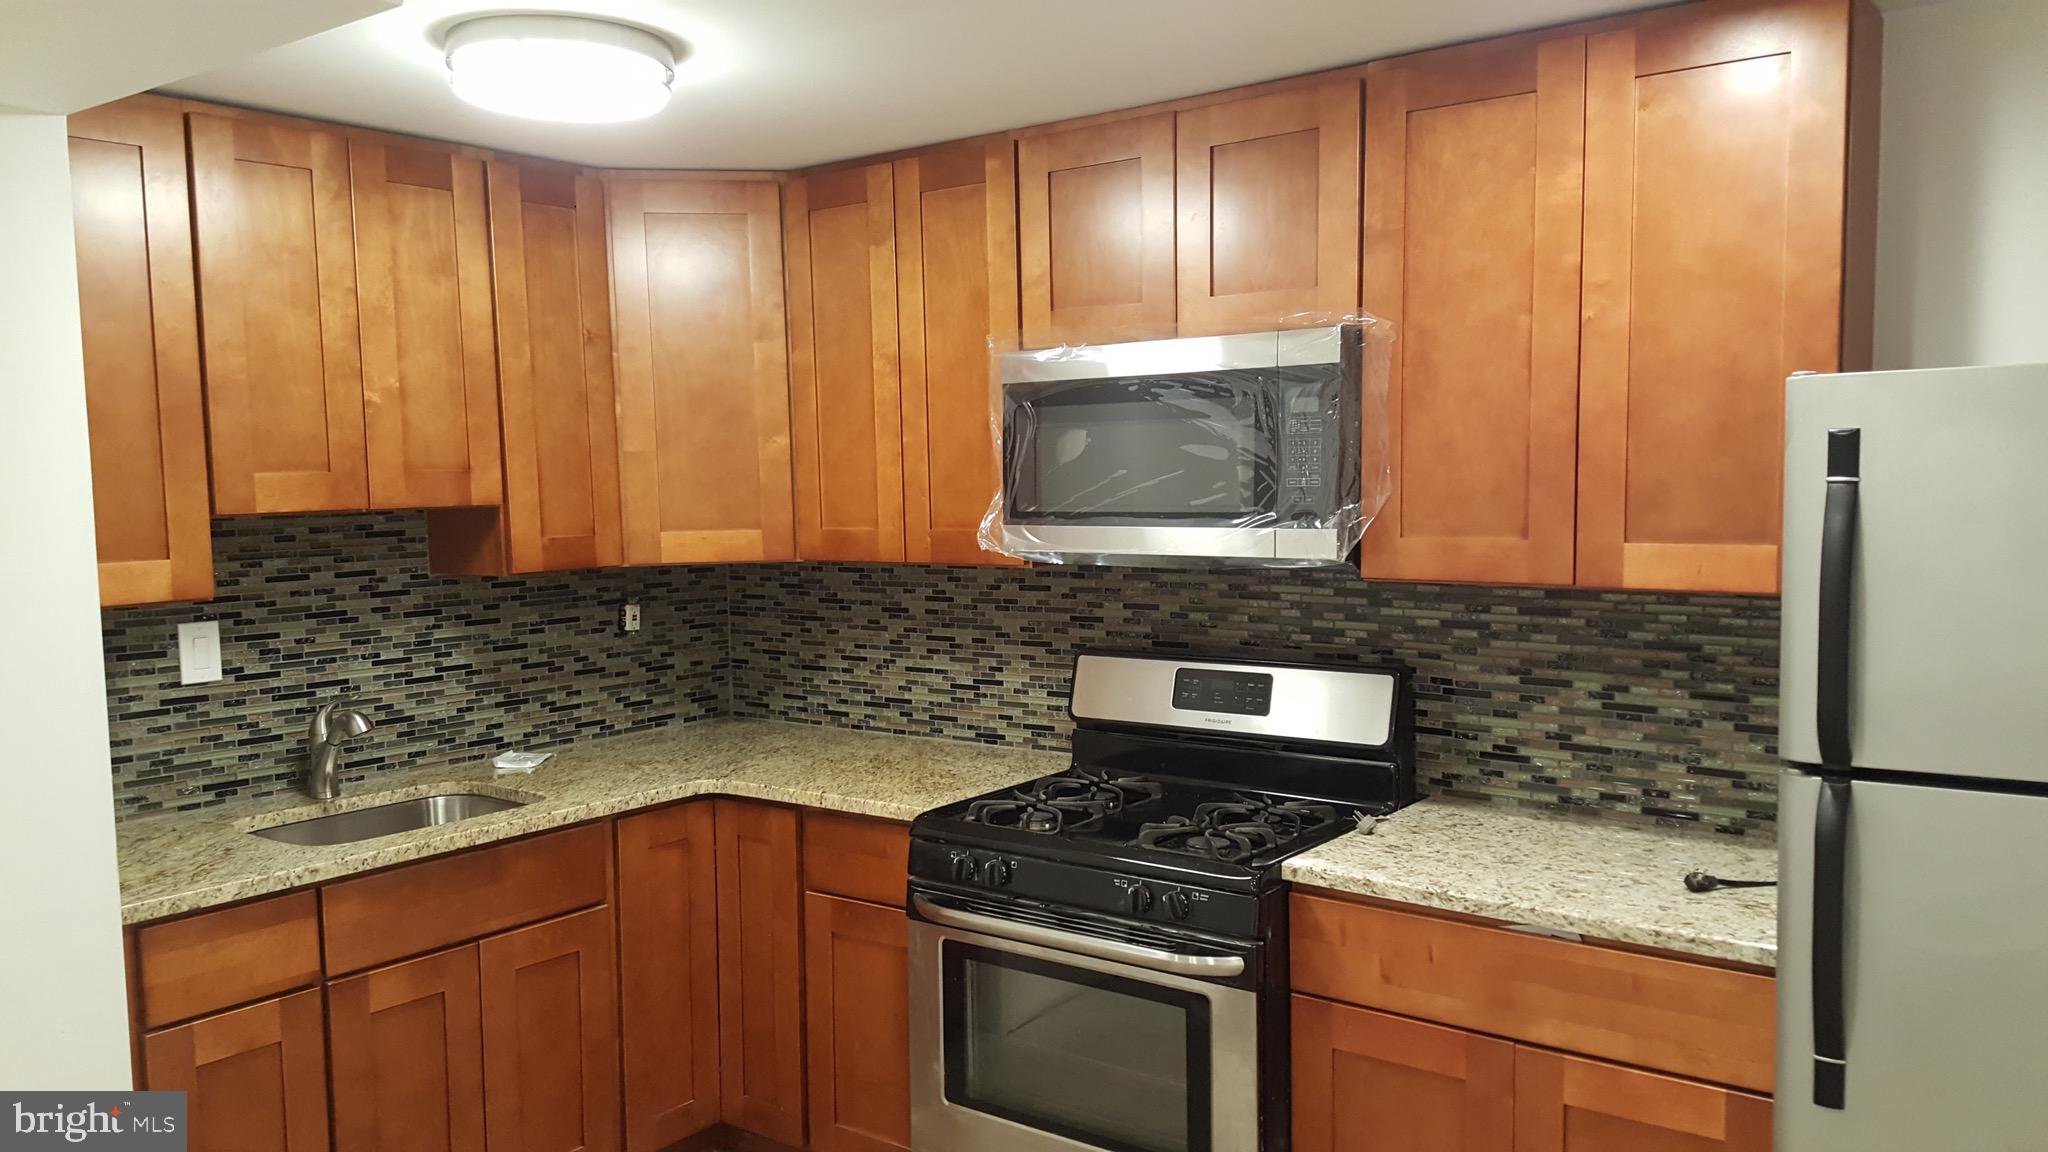 a kitchen with granite countertop cabinets stainless steel appliances and counter space